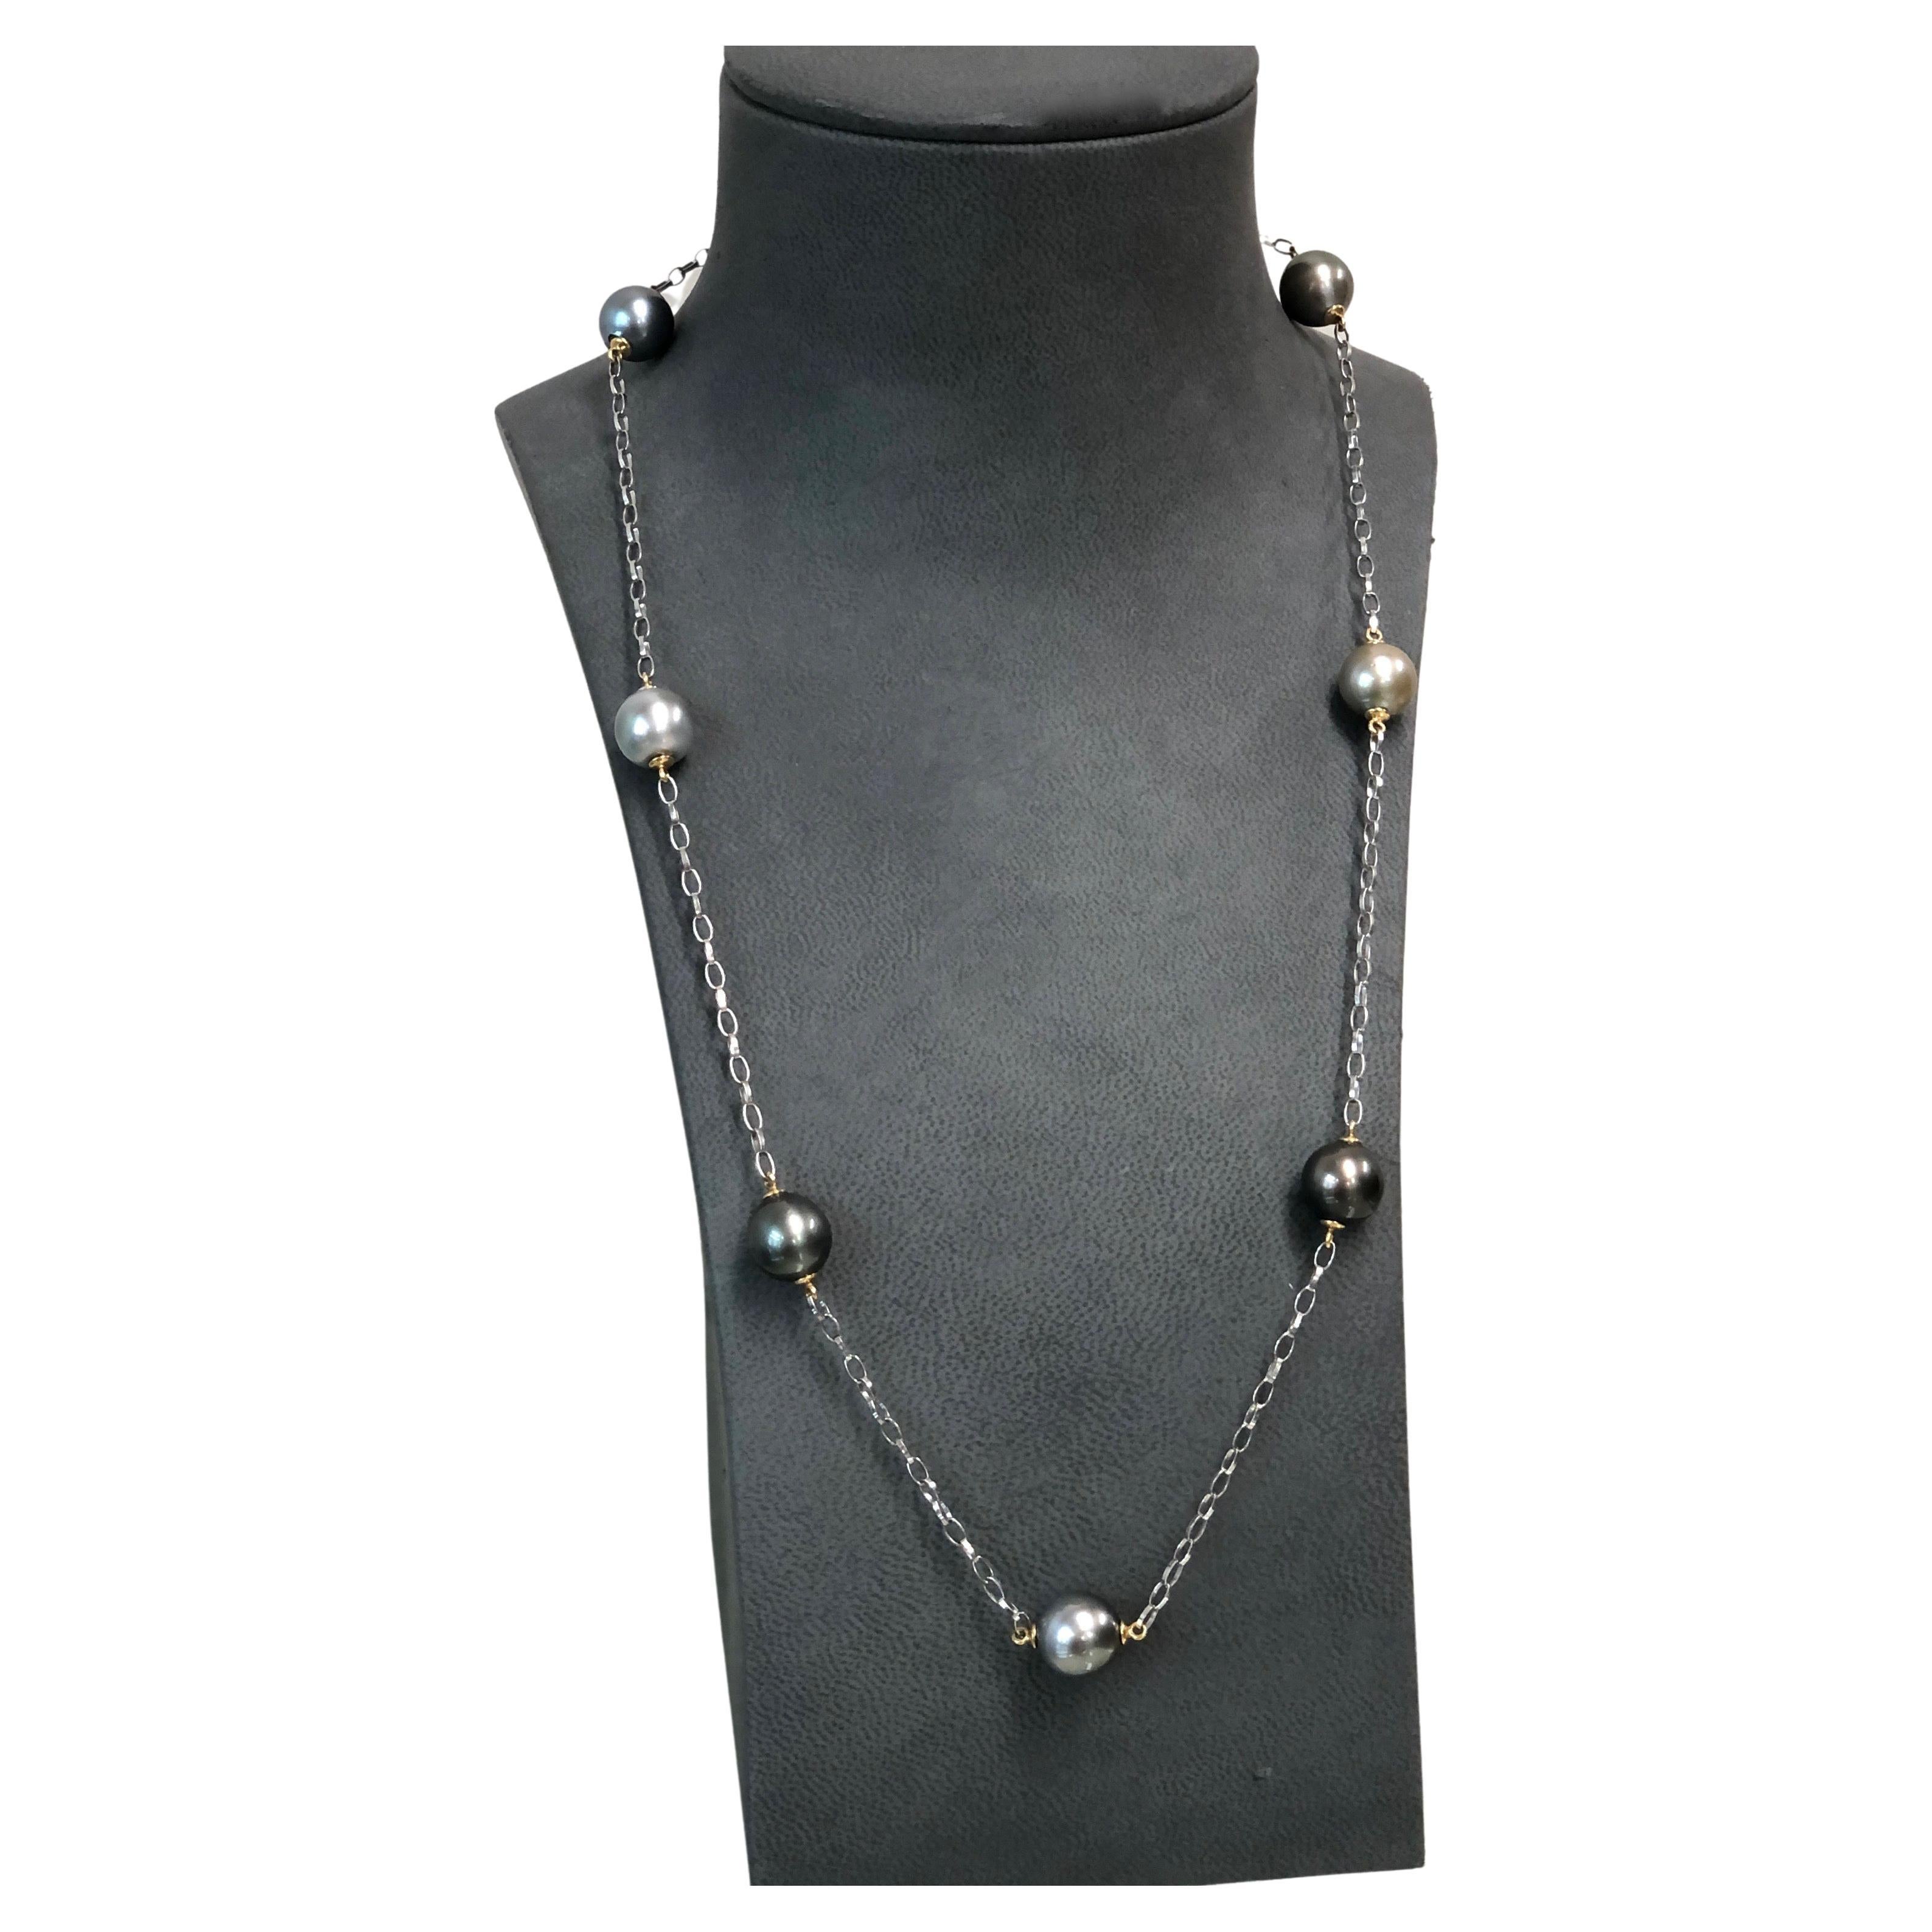 Natural Black Tahitial Pearls on White Gold Necklace